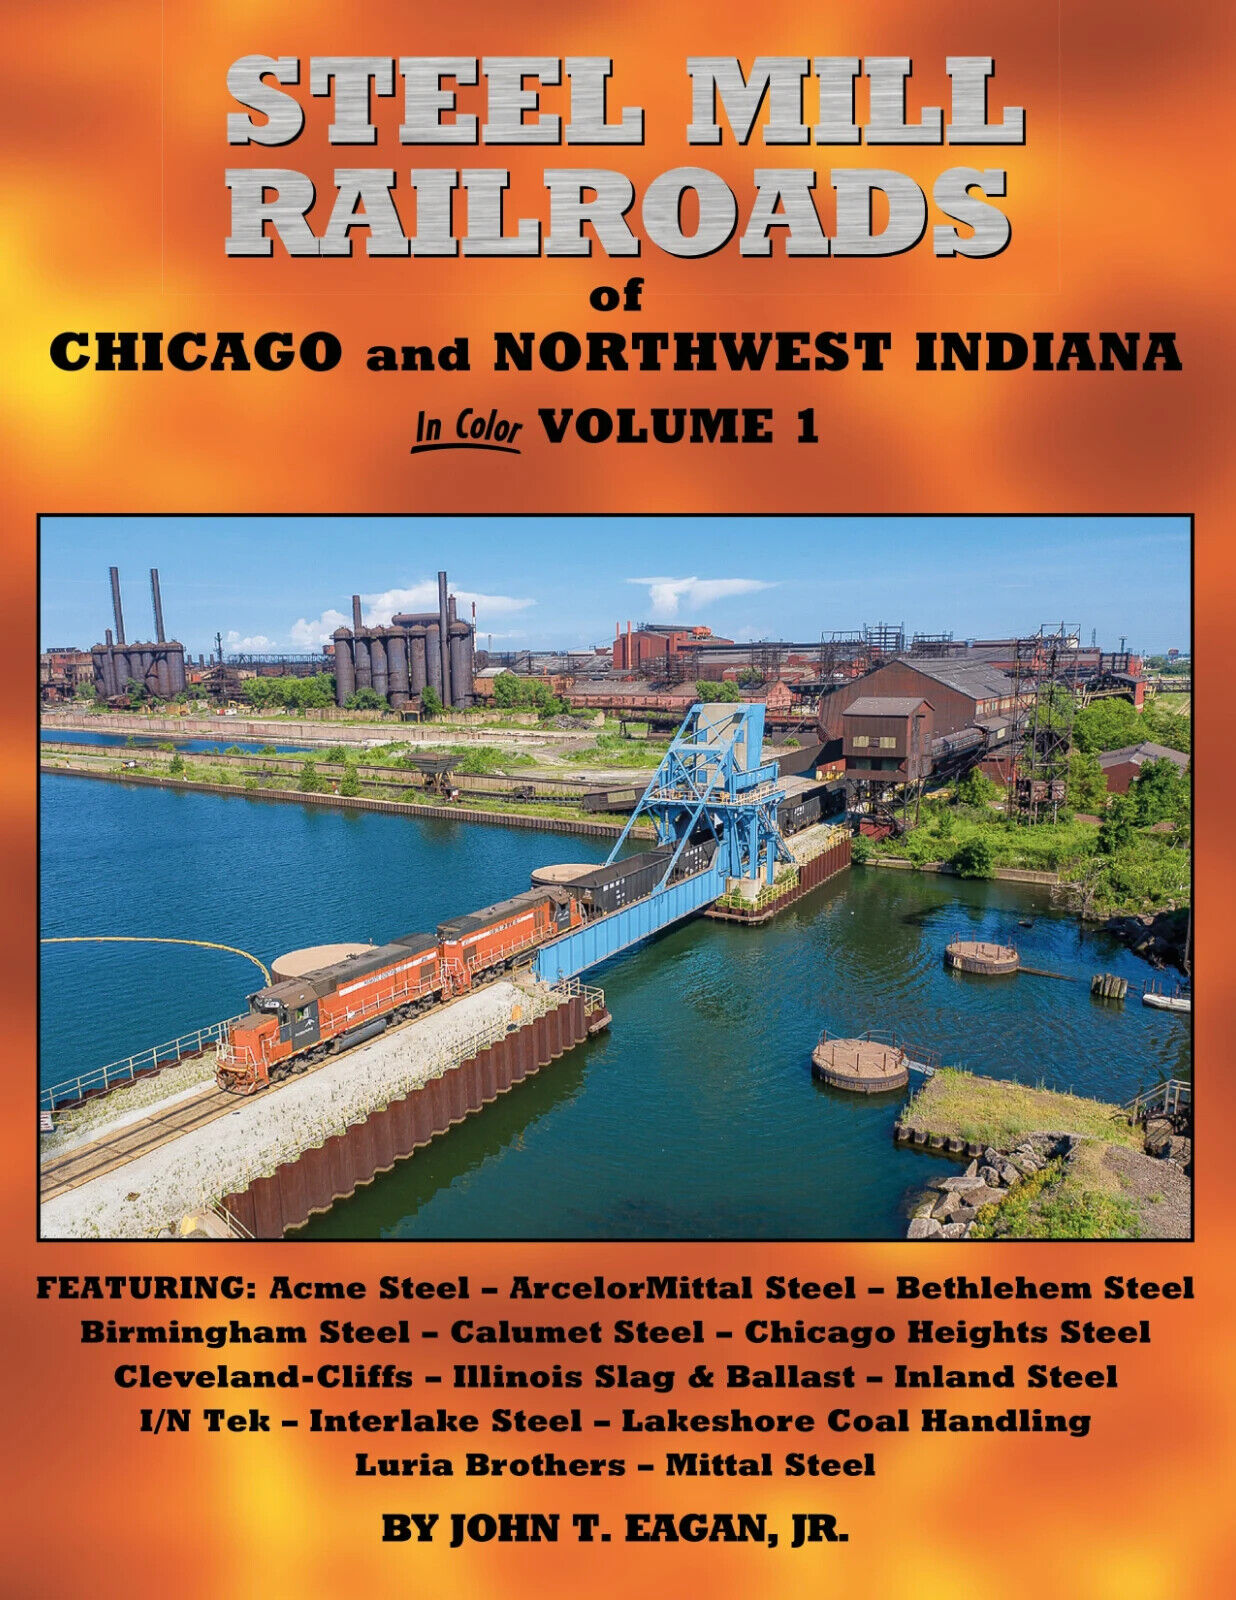 Book: Steel Mill Railroads of Chicago & NW Indiana Vol. 1 SIGNED/#'D DIRECT